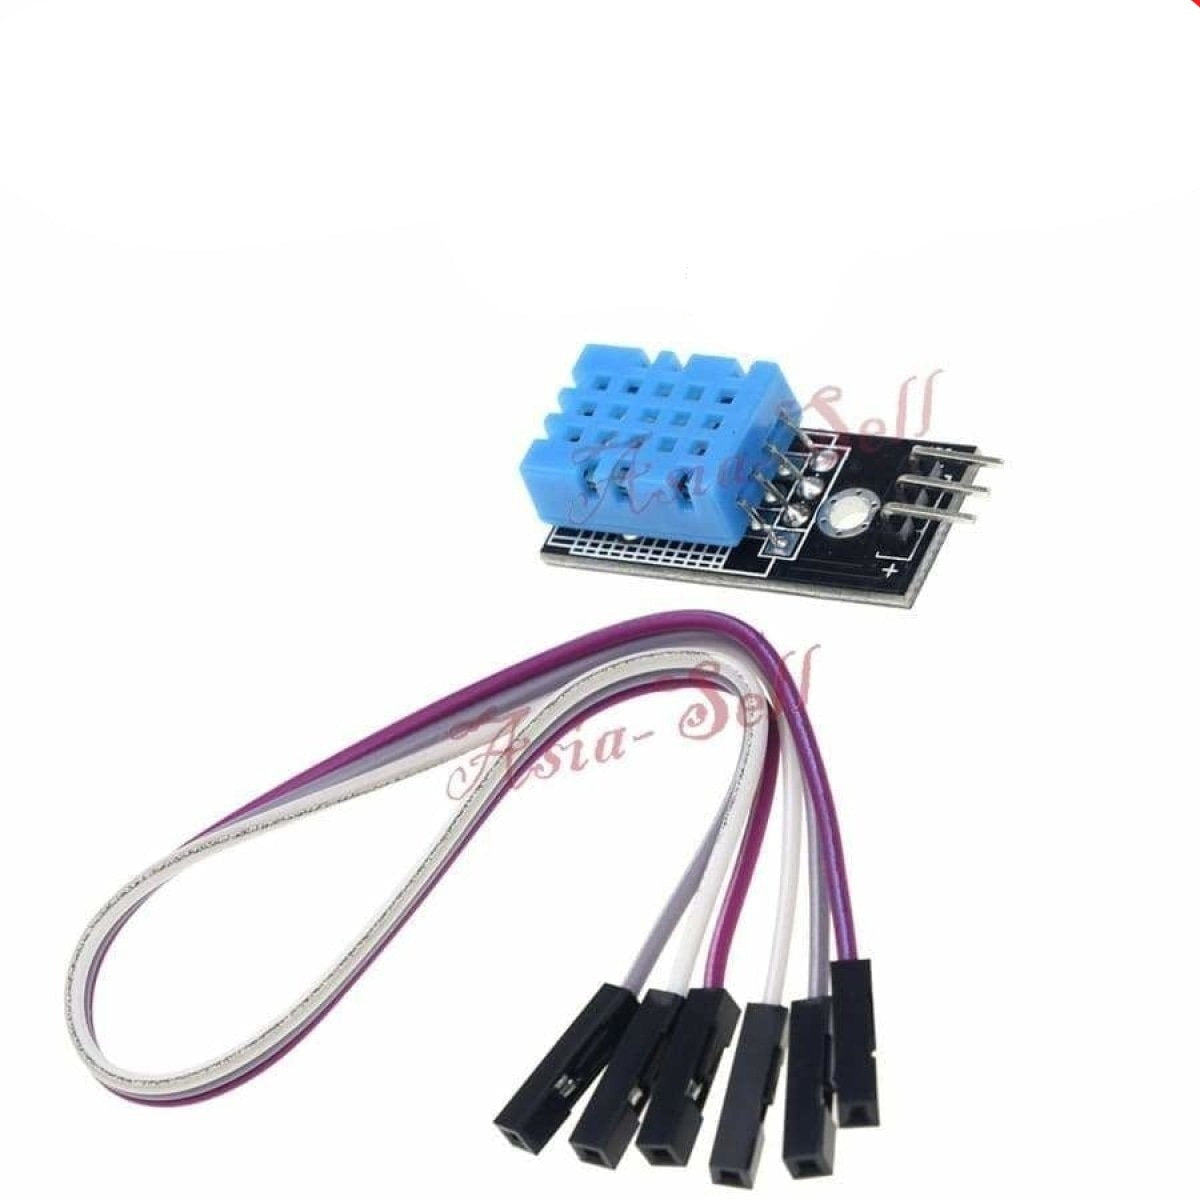 Dht11 Analog Temperature Humidity Sensor With 2.54Mm Cables Sensors